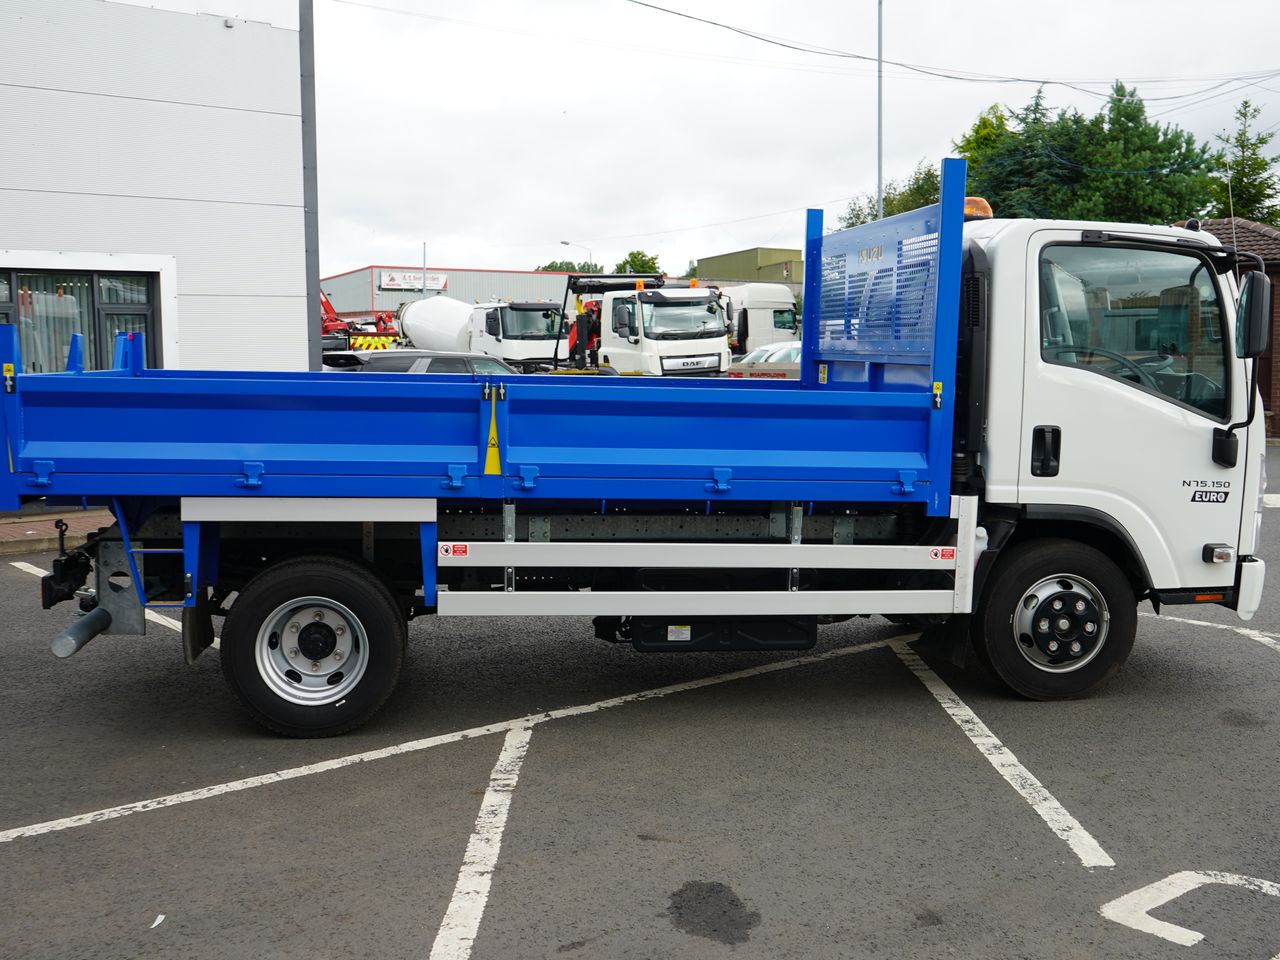 Ready to go Isuzu N75.150, Tipper, -, 7.5 Tonne, Day Cab, Automatic, 3 Seats in Cab, Beacon Bar, Electric Windows, Rear Window in Cab, Spare Wheel, , -, - | for sale at MV Commercial, the UKs leading Truck, Trailers and Van supplier. (LM69NDZ 54516)